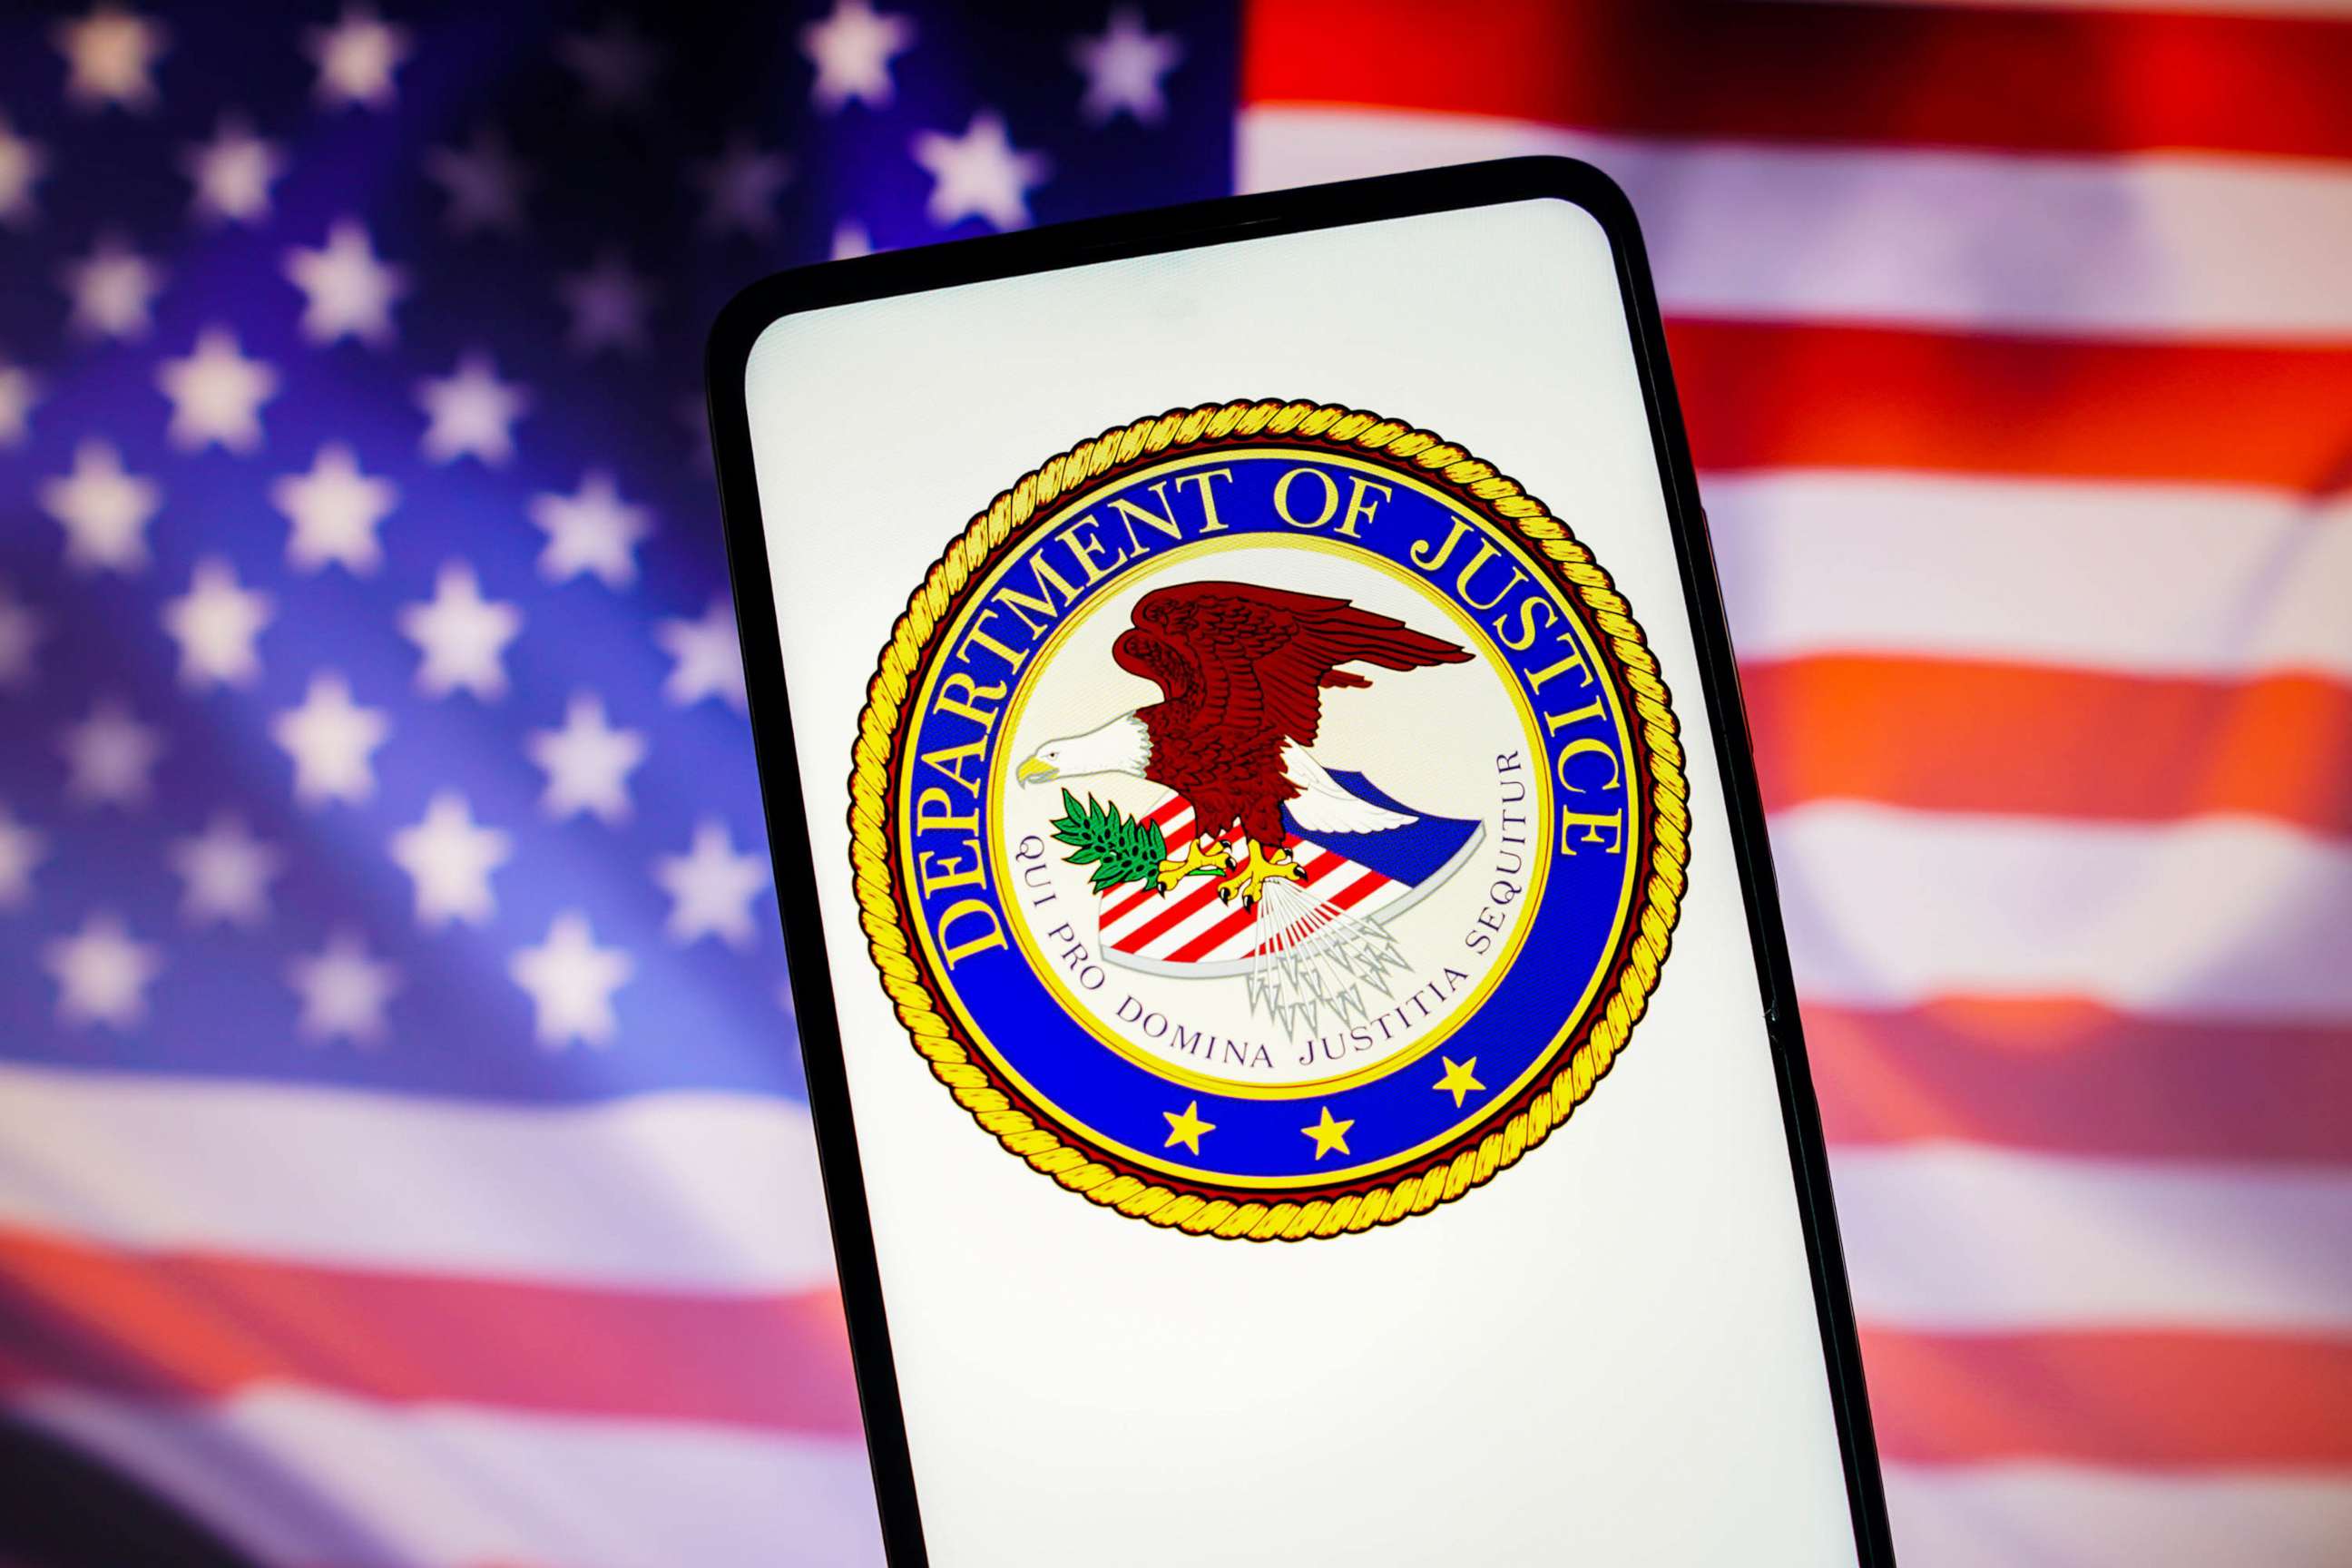 PHOTO: FILE - In this photo illustration, the United States Department of Justice (DOJ) logo is displayed on a smartphone screen with a United States flag in the background.